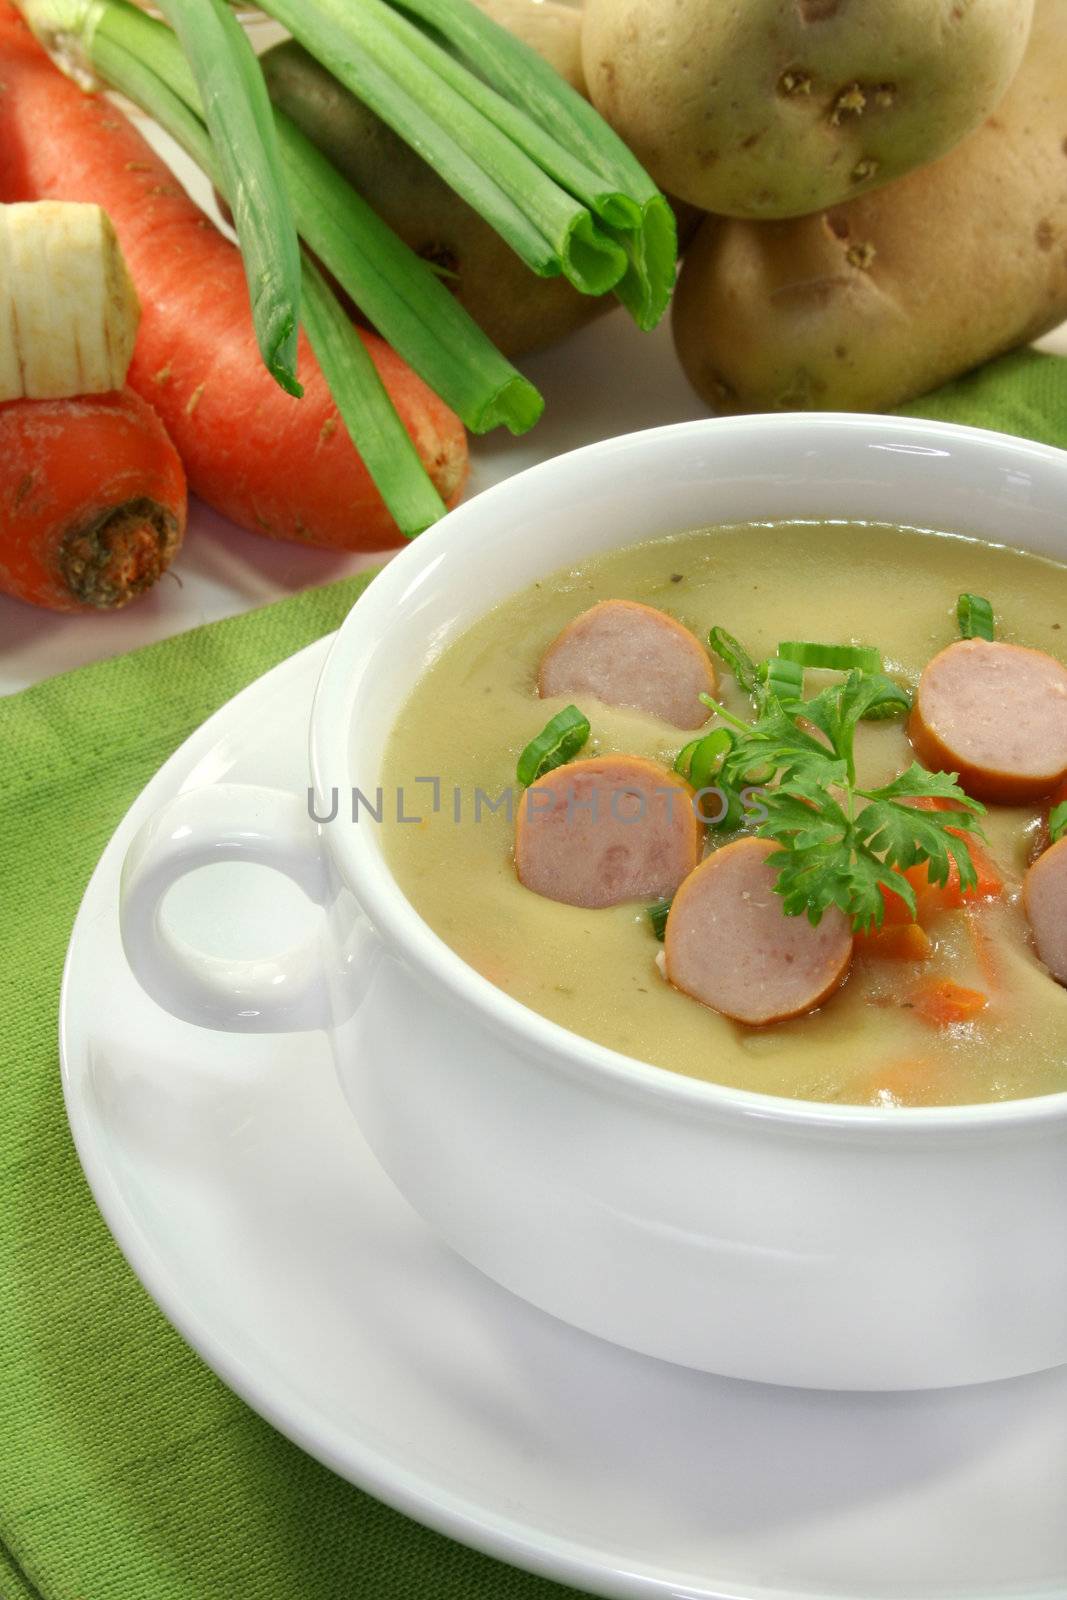 Cream of potato soup with vegetables and Vienna sausages